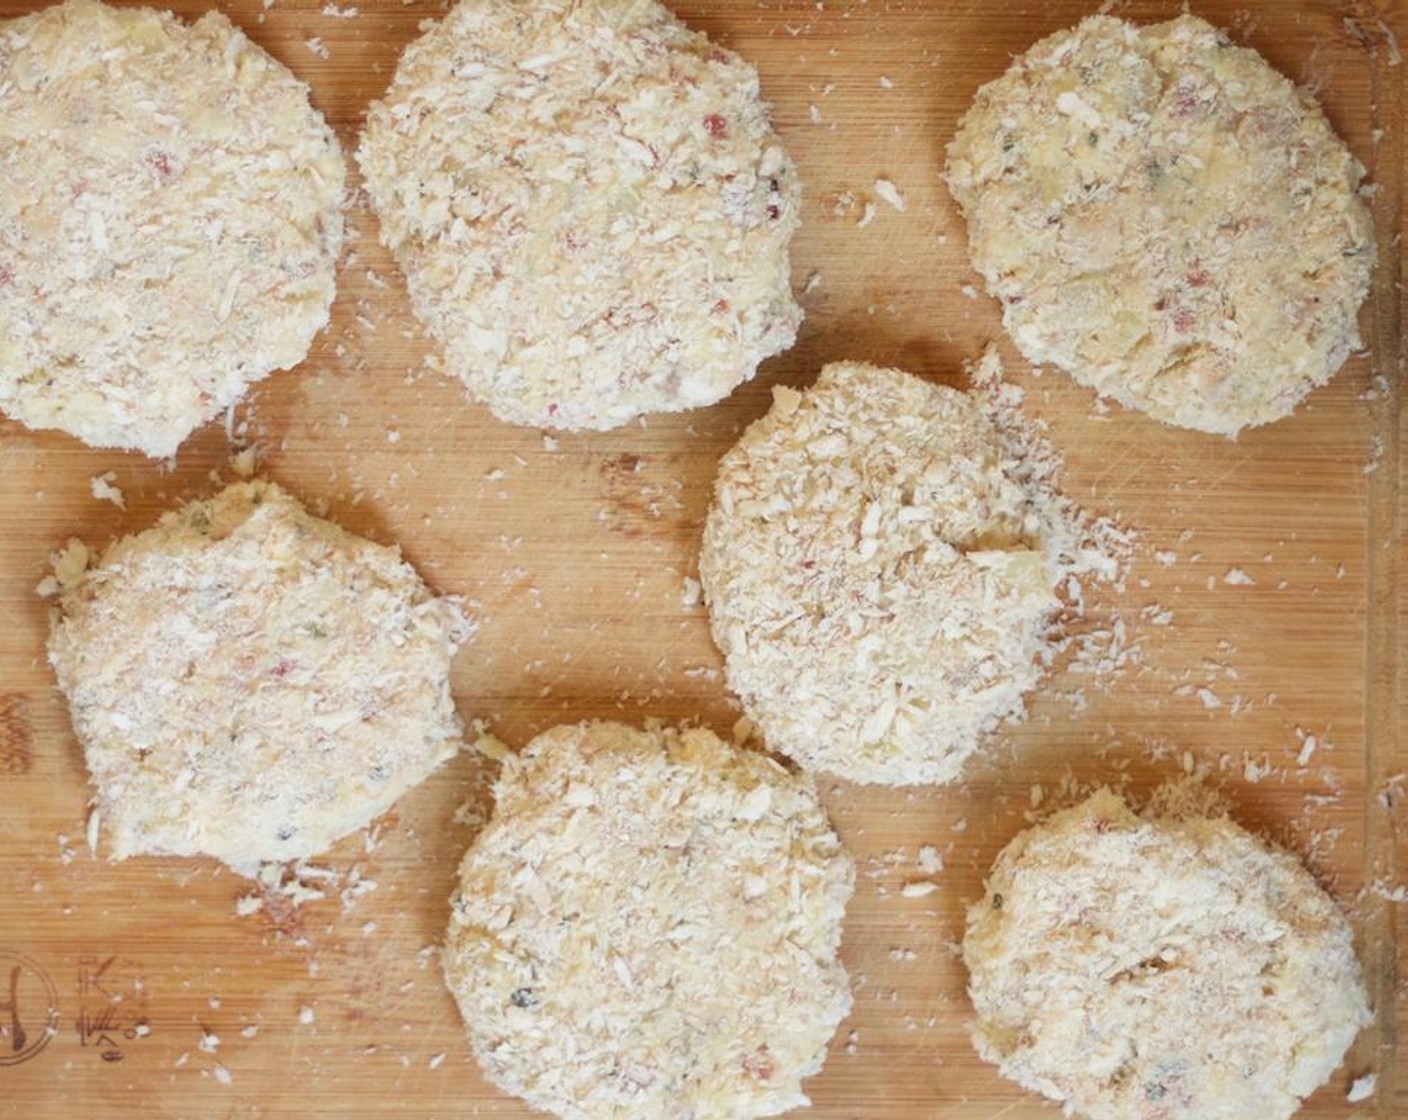 step 9 Add the Panko Breadcrumbs (1 cup) to a shallow bowl. With your hands, form 3 tablespoon of the mixture into disks. Add the disks to the breadcrumbs one at a time, and turn to coat. Arrange on a cutting board or baking sheet, and refrigerate for 10 minutes.